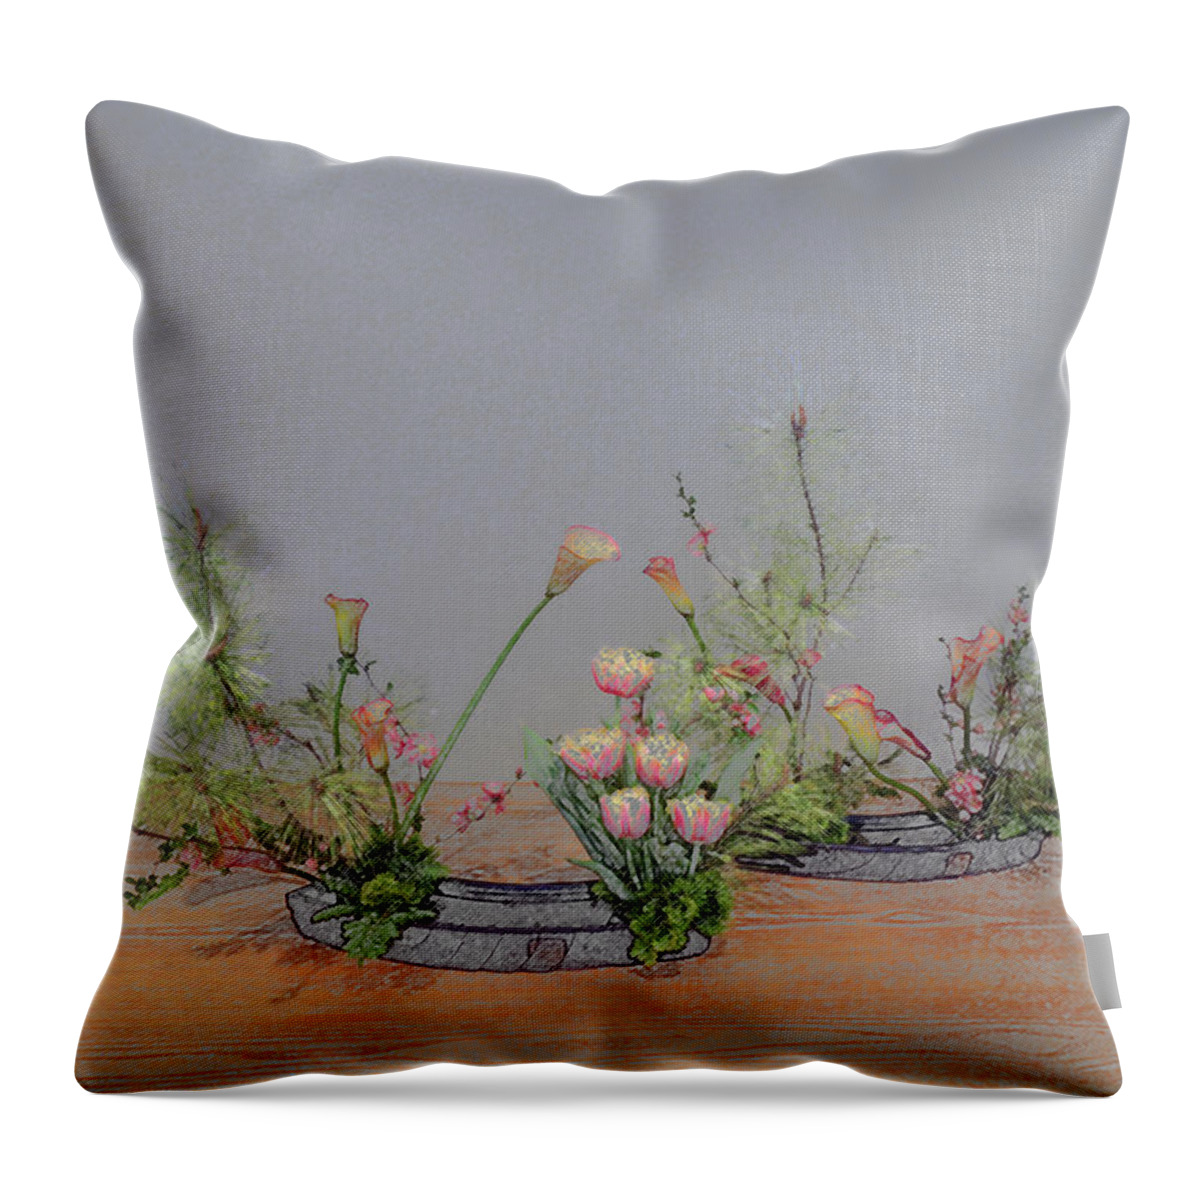 Serenity Throw Pillow featuring the digital art Serenity by Don Wright